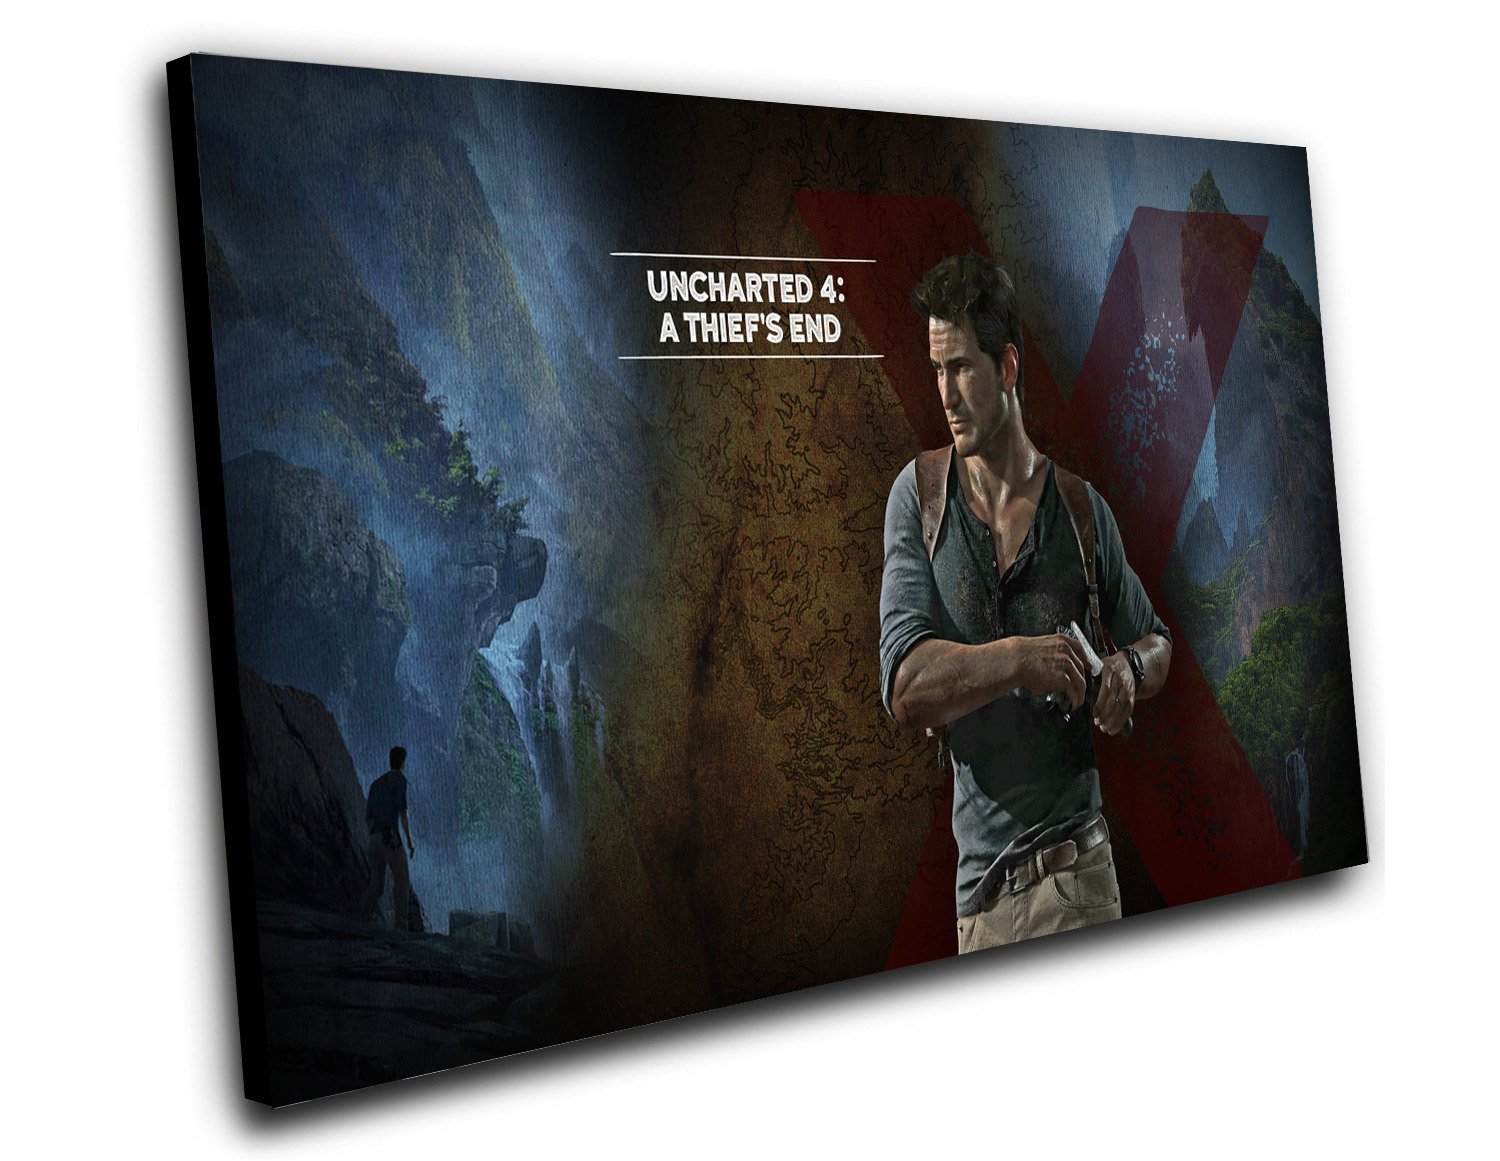 Uncharted 4 A Thief's End Game 12"x16" (30cm/40cm) Canvas Print